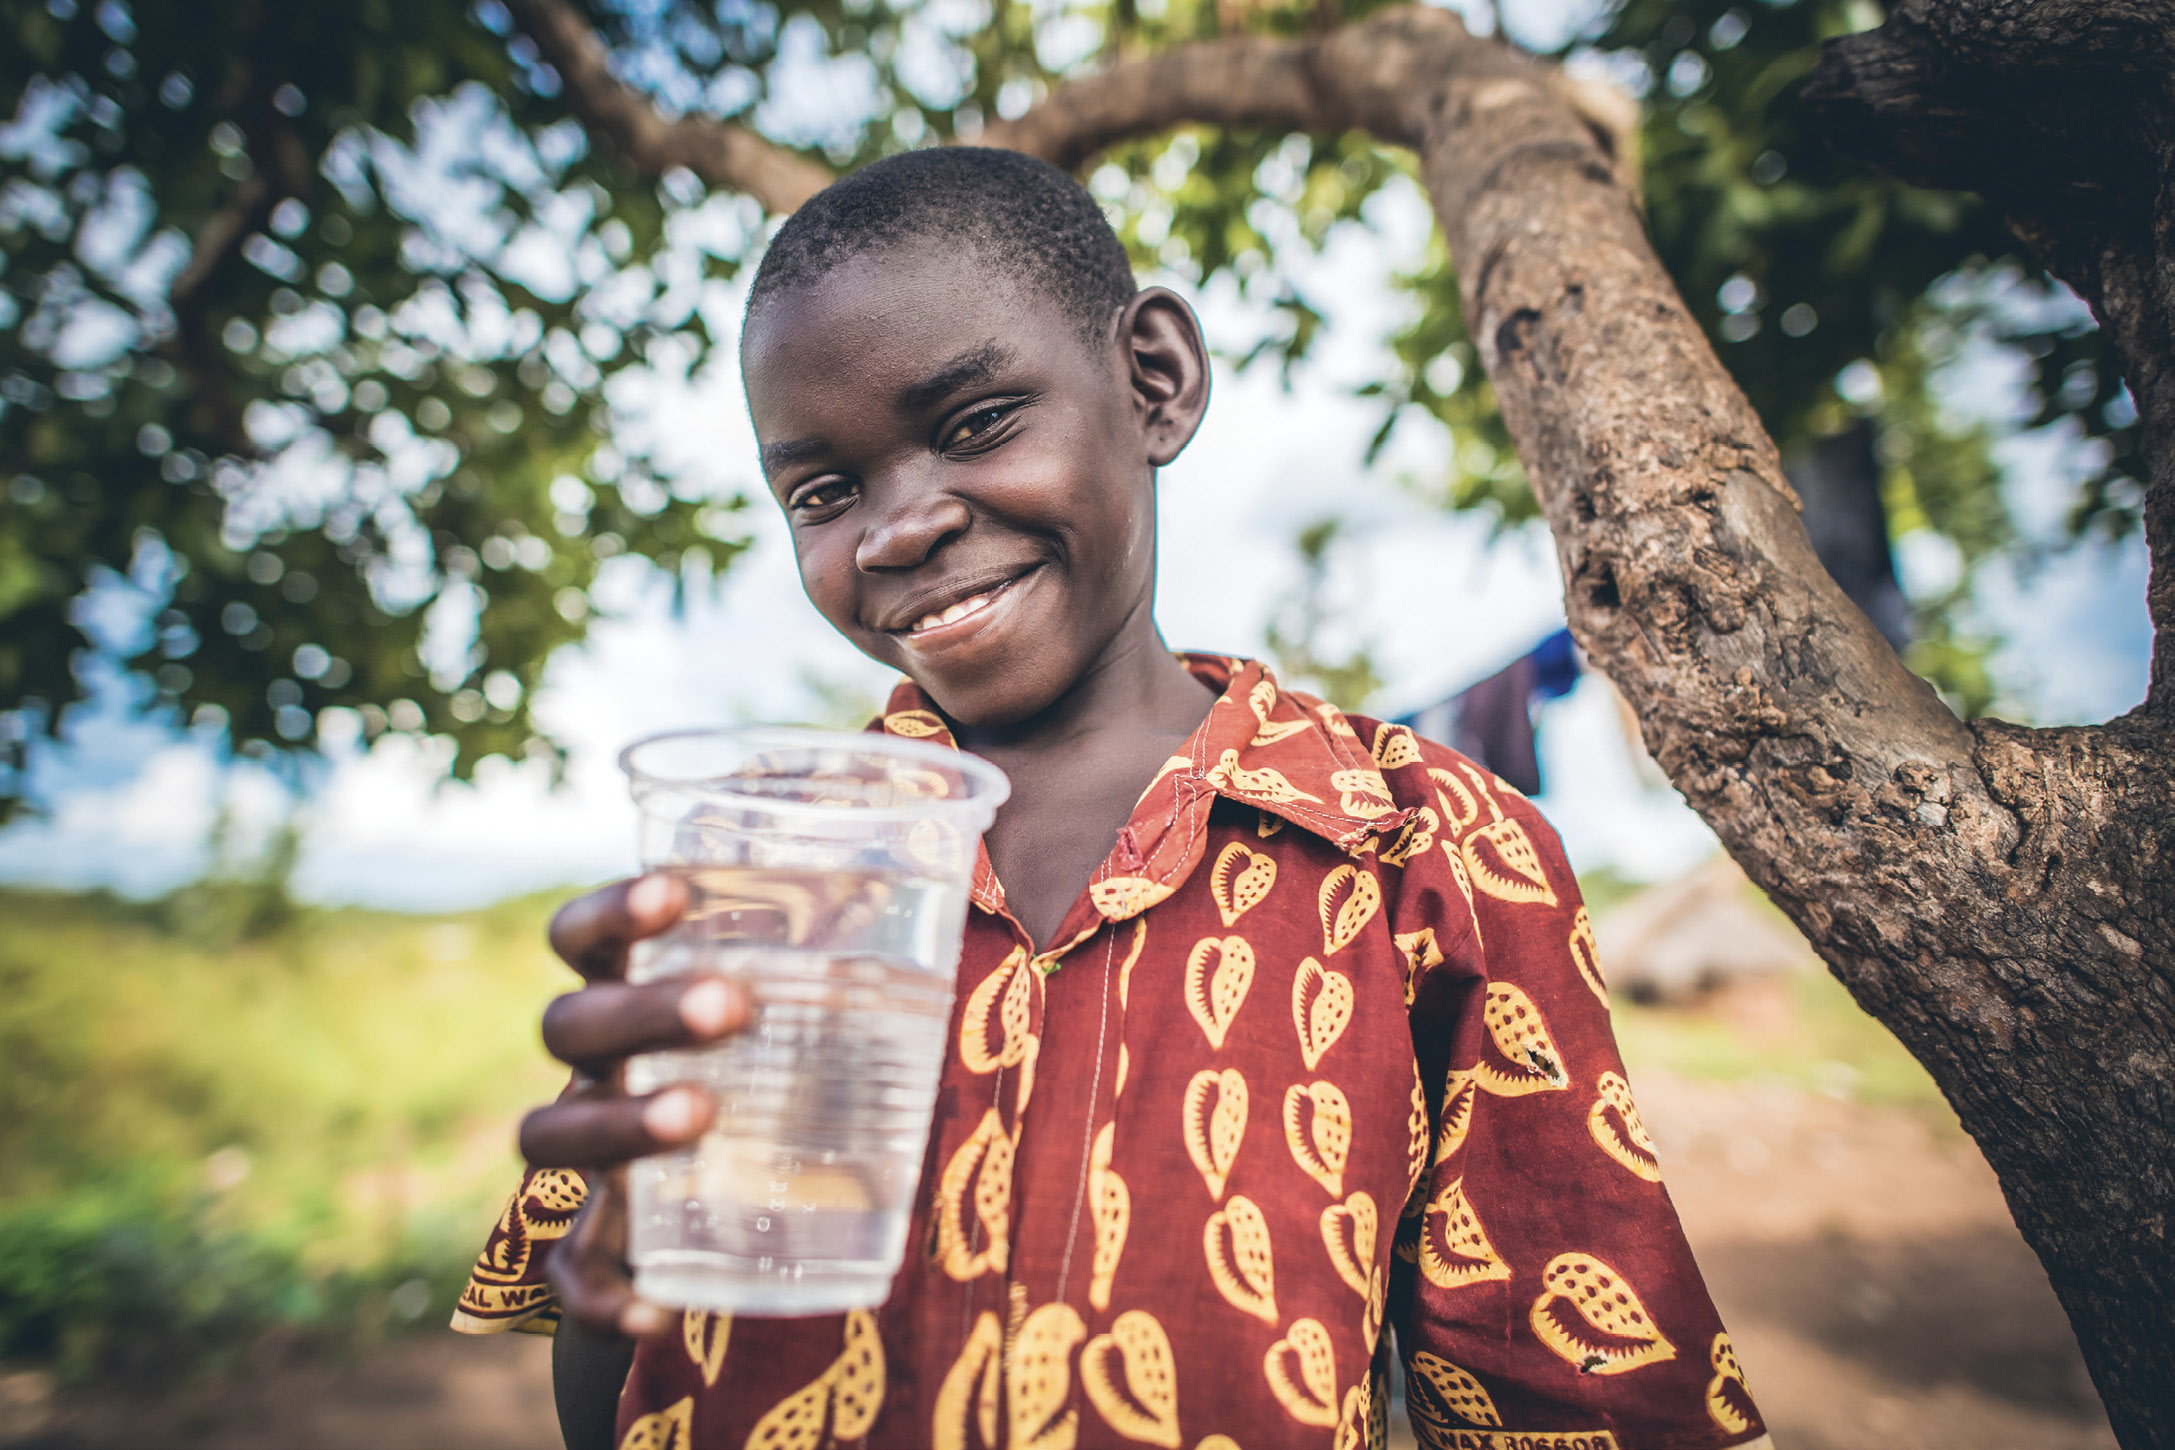 Providing clean, safe drinking water to a child leads to a profound ripple effect, including better health and improved opportunities for education.